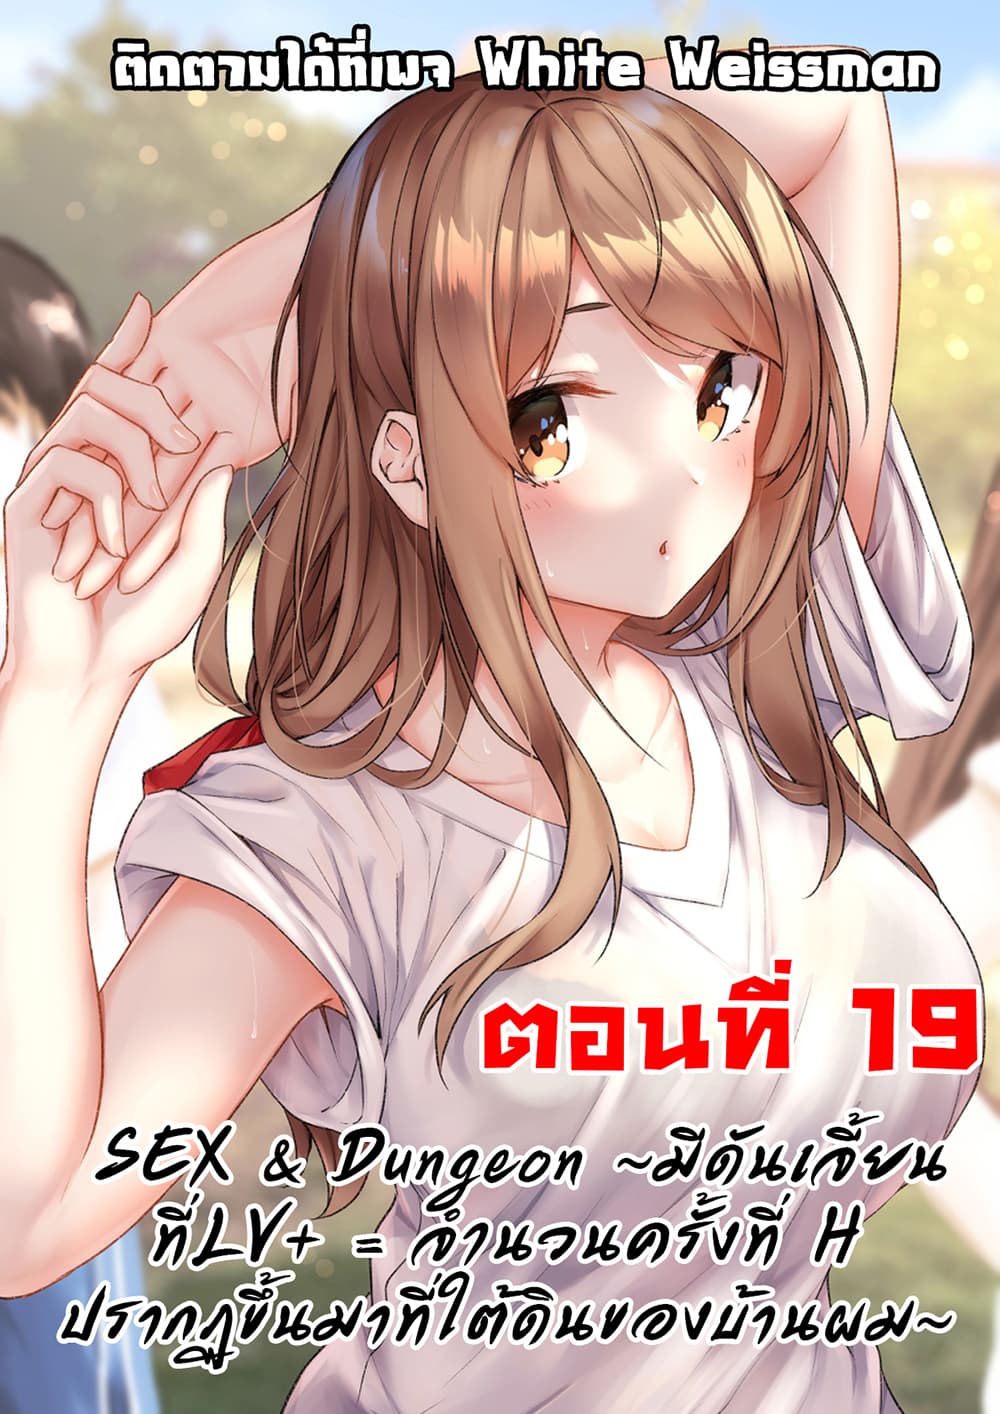 Sex and Dungeon! 19-19